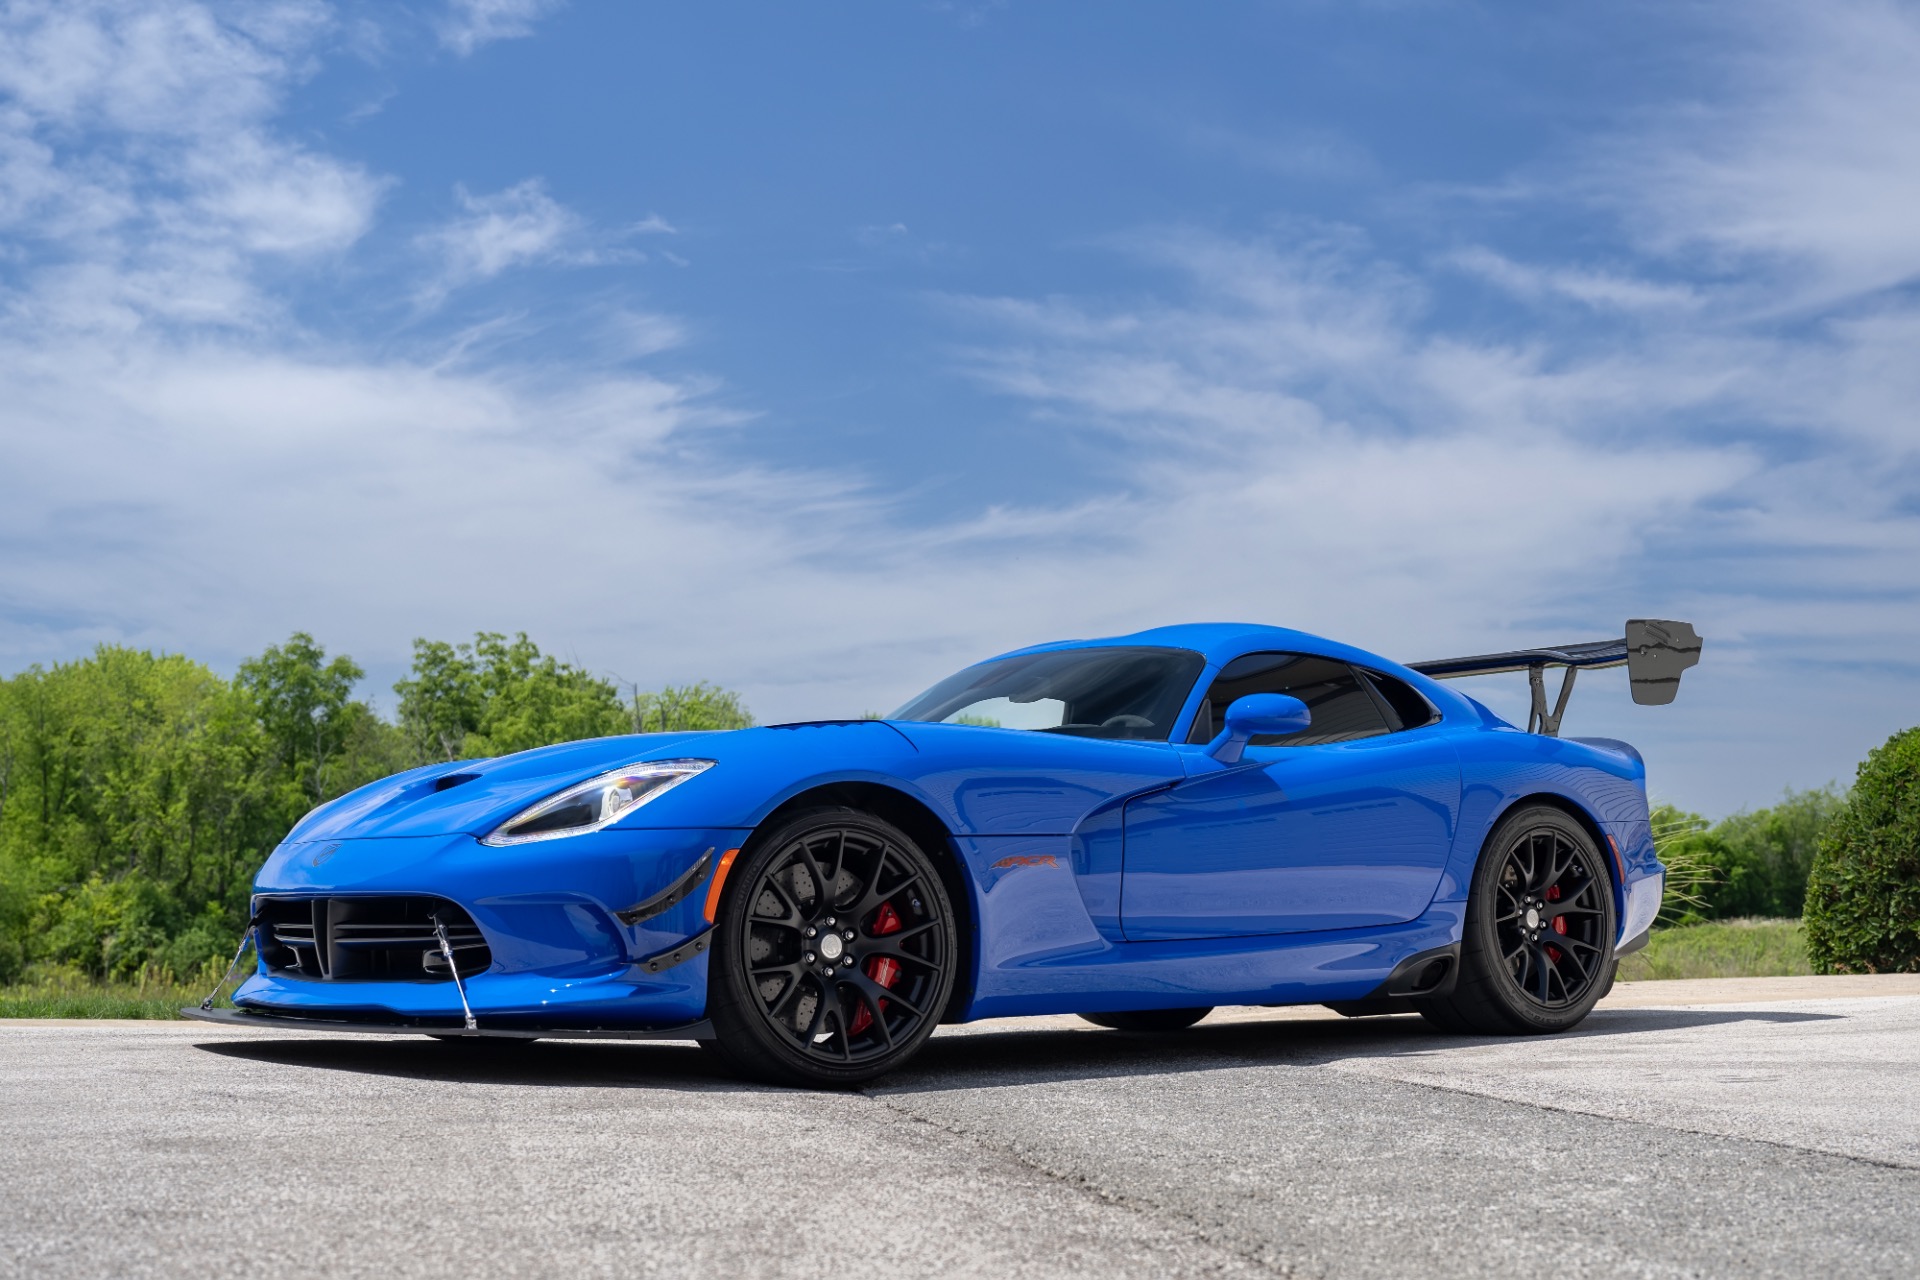 Used-2017-Dodge-Viper-ACR-Extreme-Aero-ONLY-3K-Miles-Competition-Blue-RARE-Collector-Quality